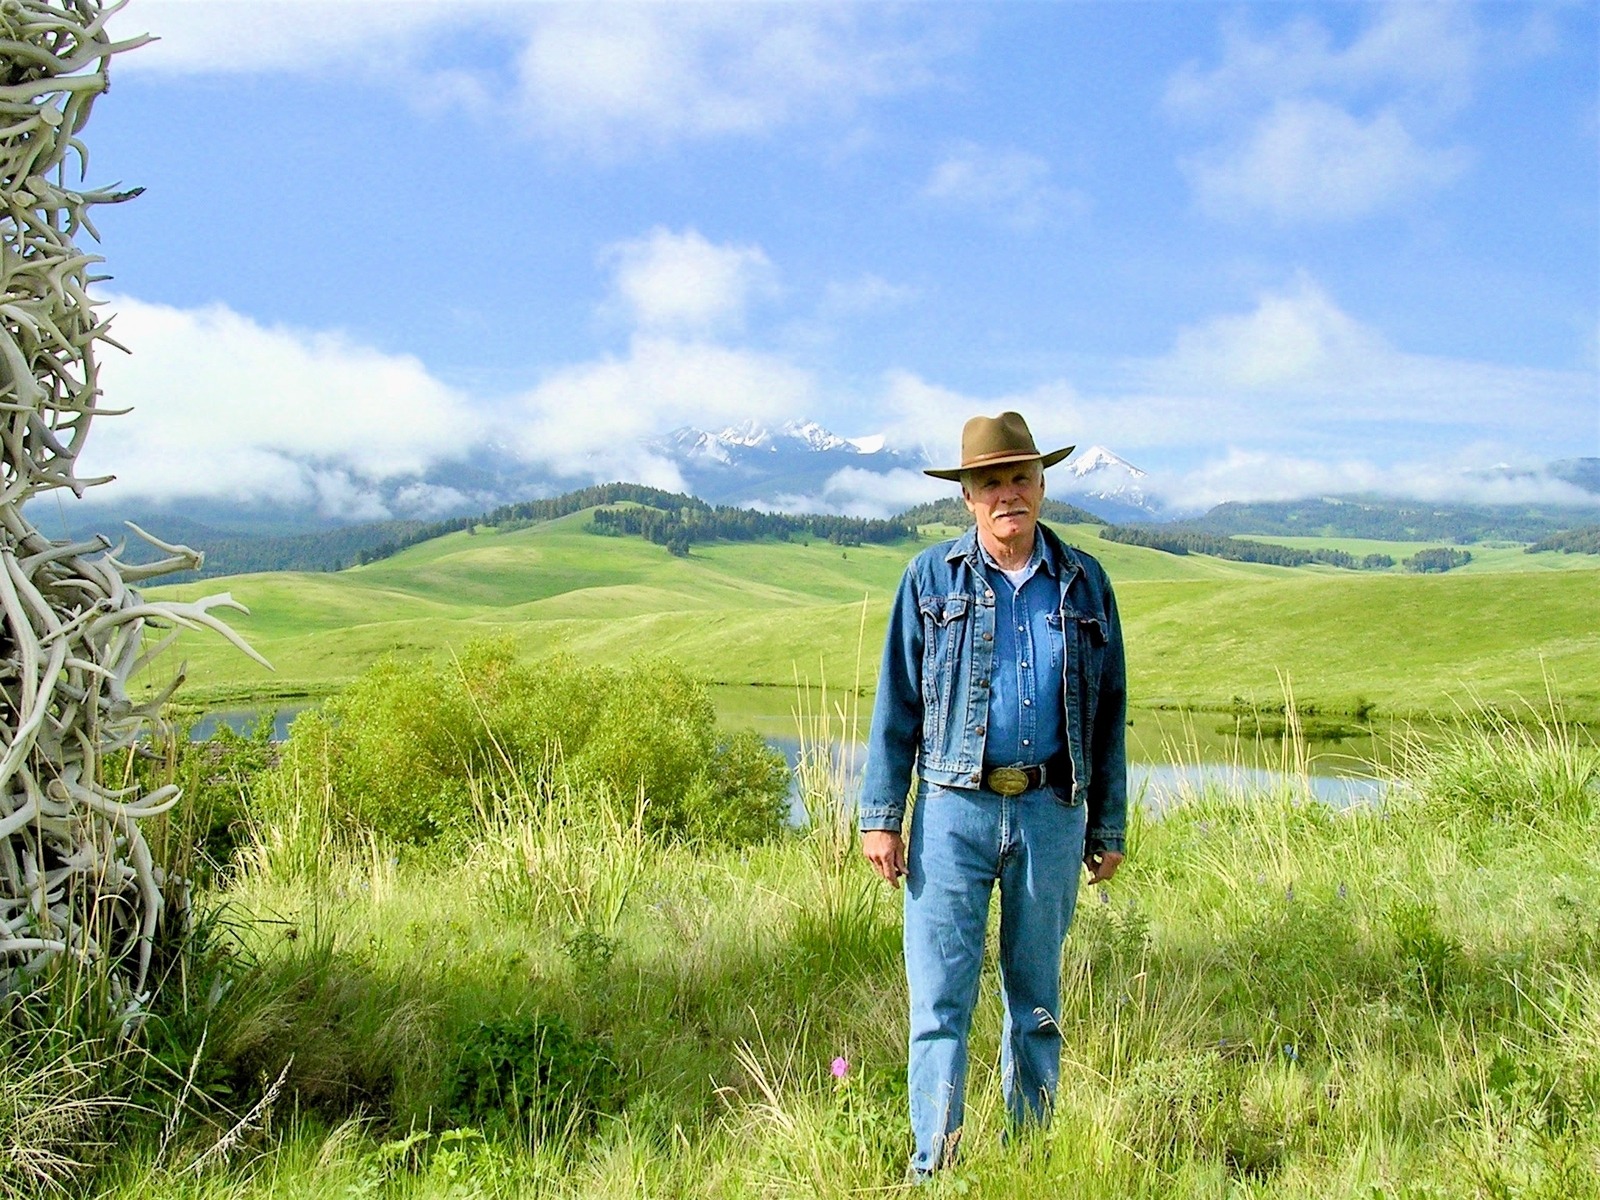 Protected forever by a green hero: What Ted Turner, the iconic American businessman and conservationist, did with the 113,000-acre Flying D Ranch outside of Bozeman represents a stark contrast to how land and outdoor experiences have been monetized, at the expense of wild nature miles to the south in the Madison Range around Big Sky. Photo by Todd Wilkinson 